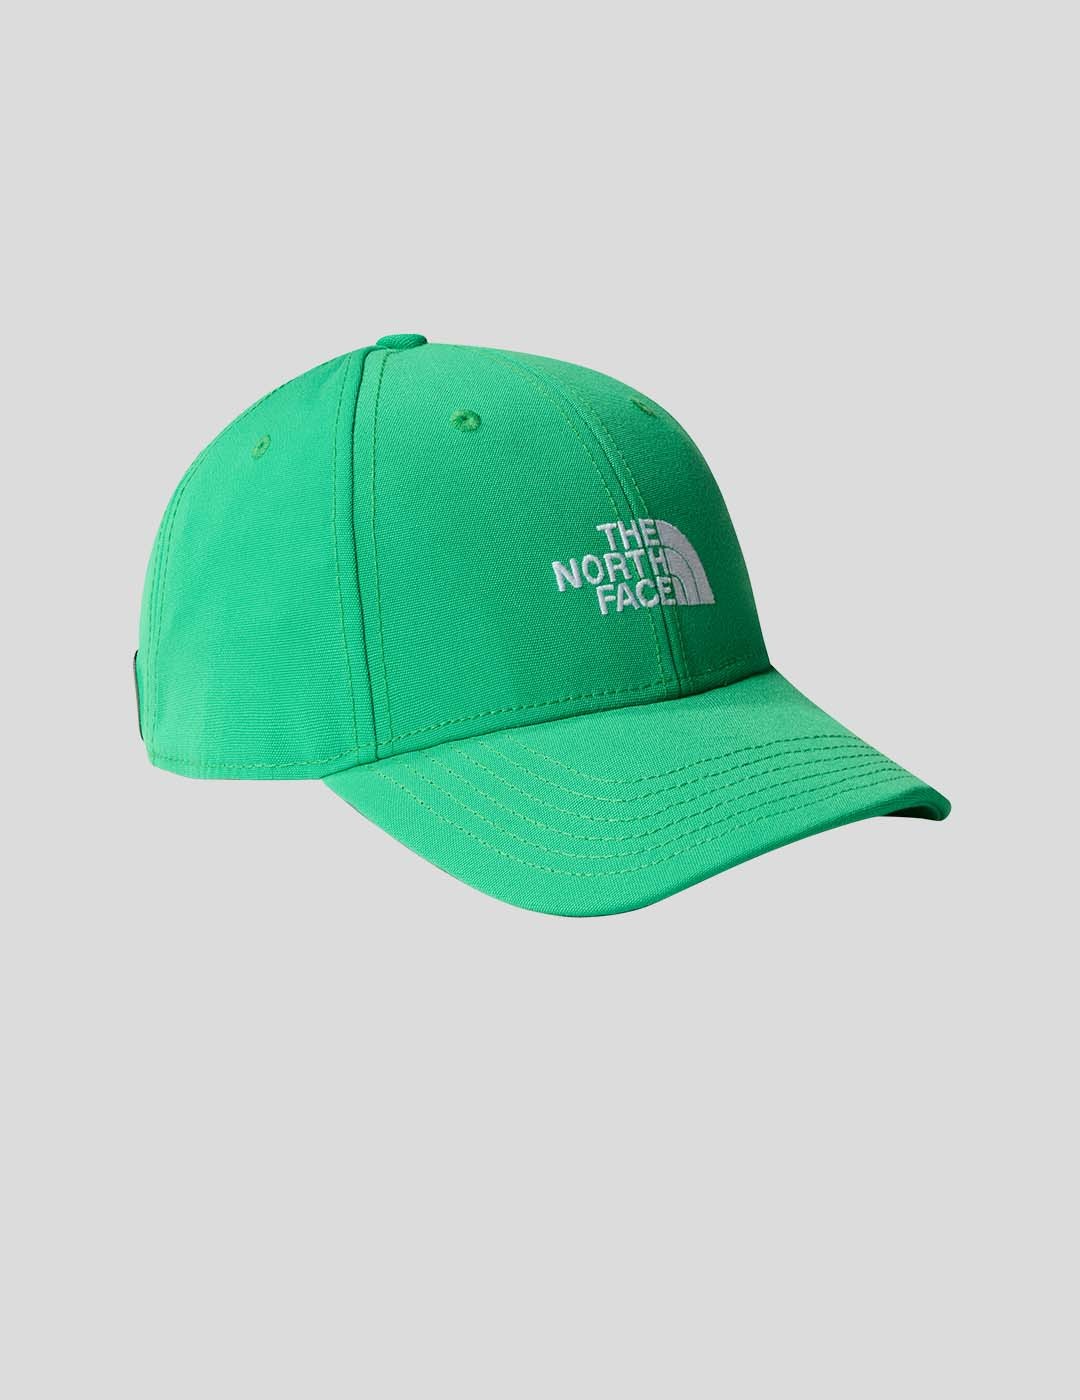 GORRA THE NORTH FACE RECYCLED 66 CLASSIC HAT  OPTIC EMERALD